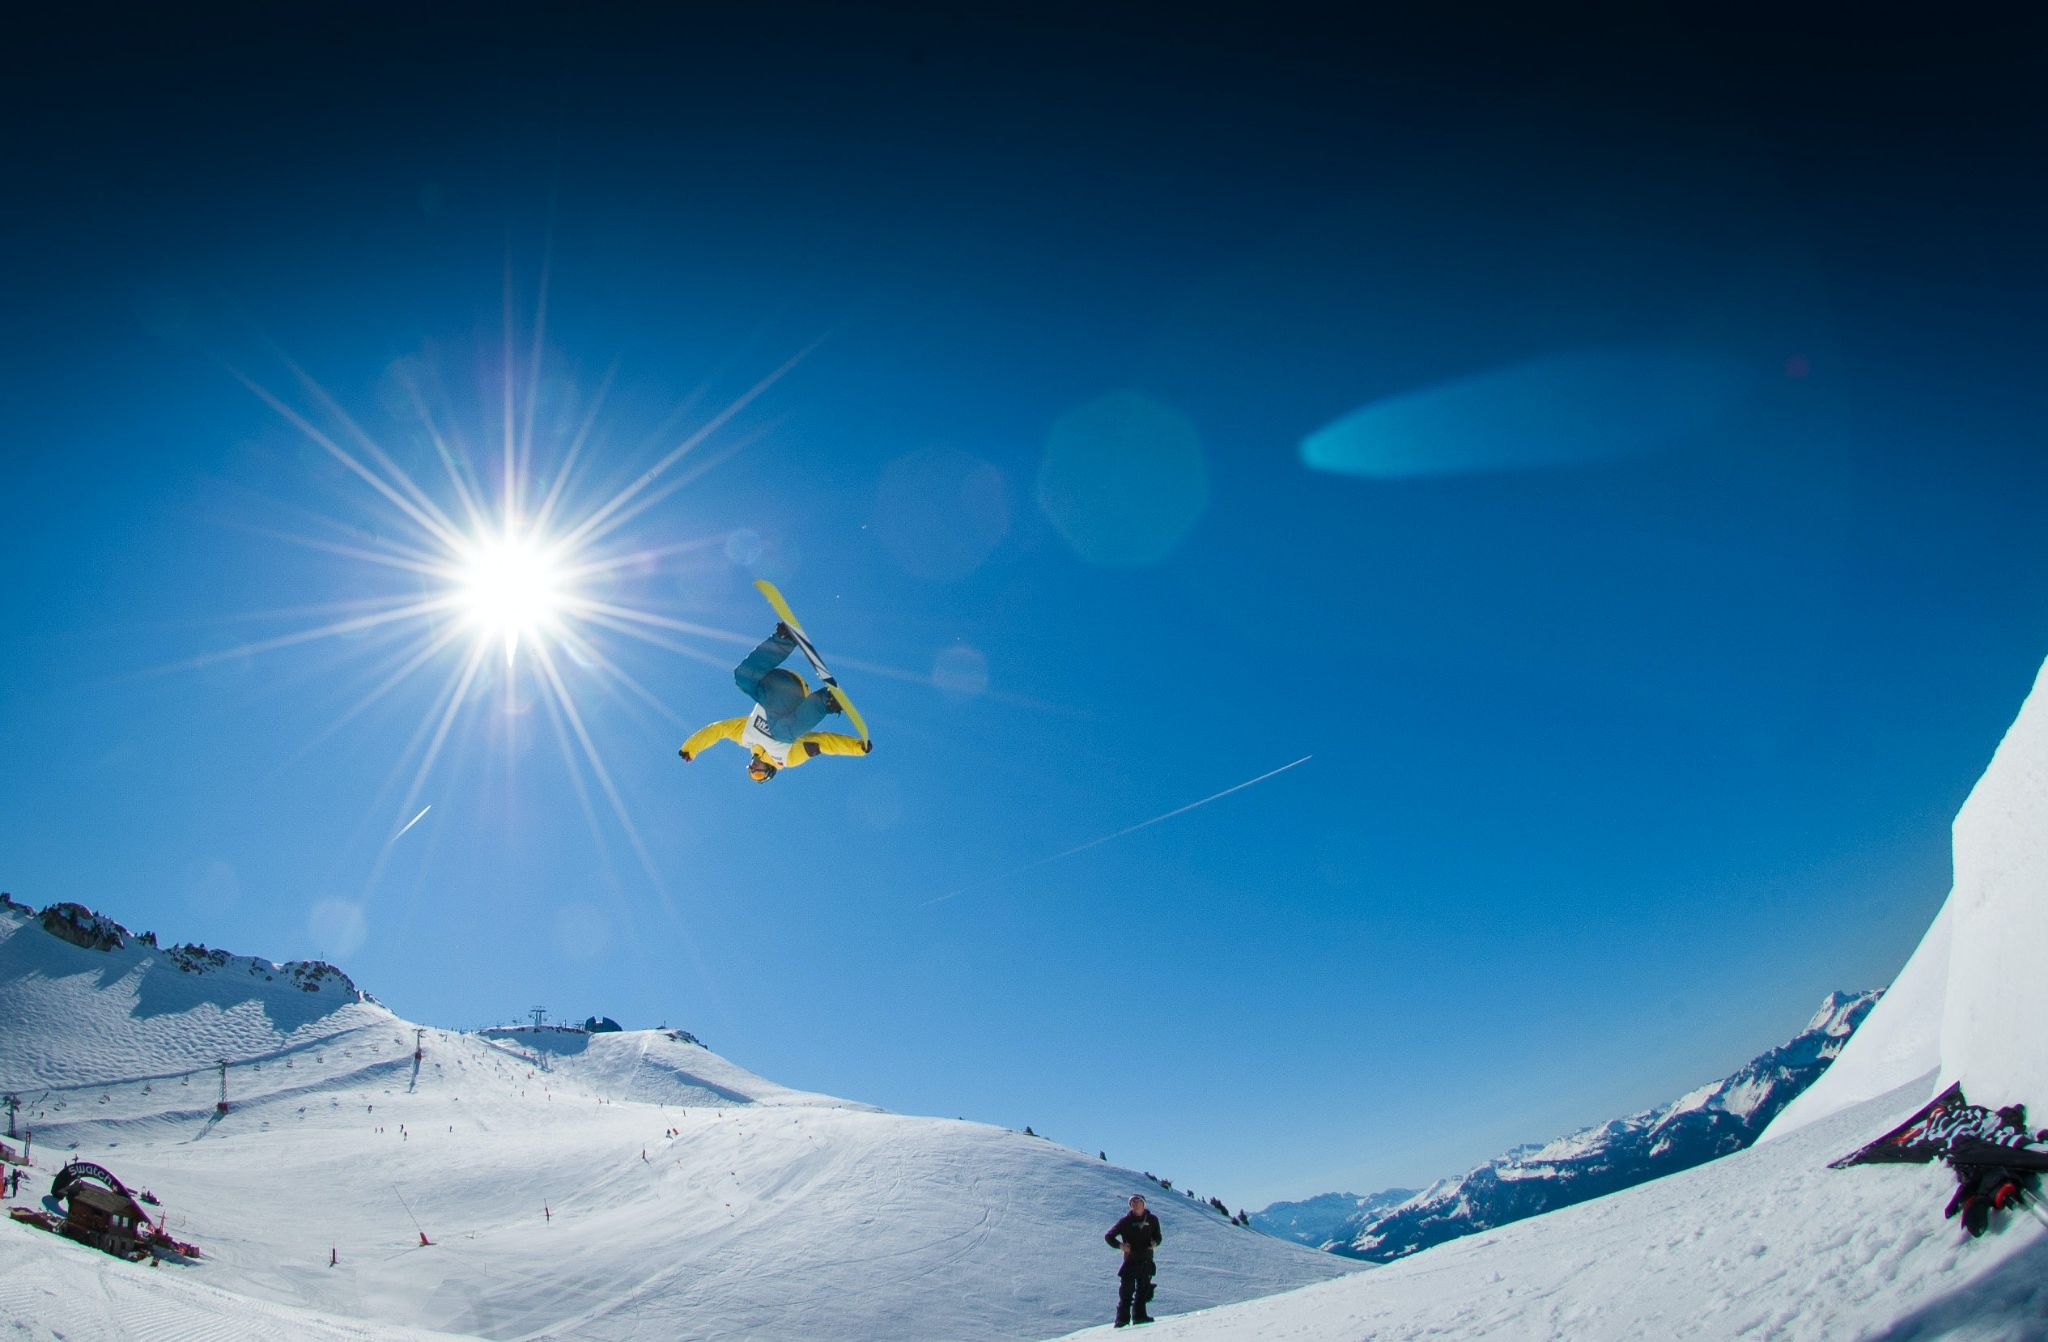 A snowboarder performing stunts in air